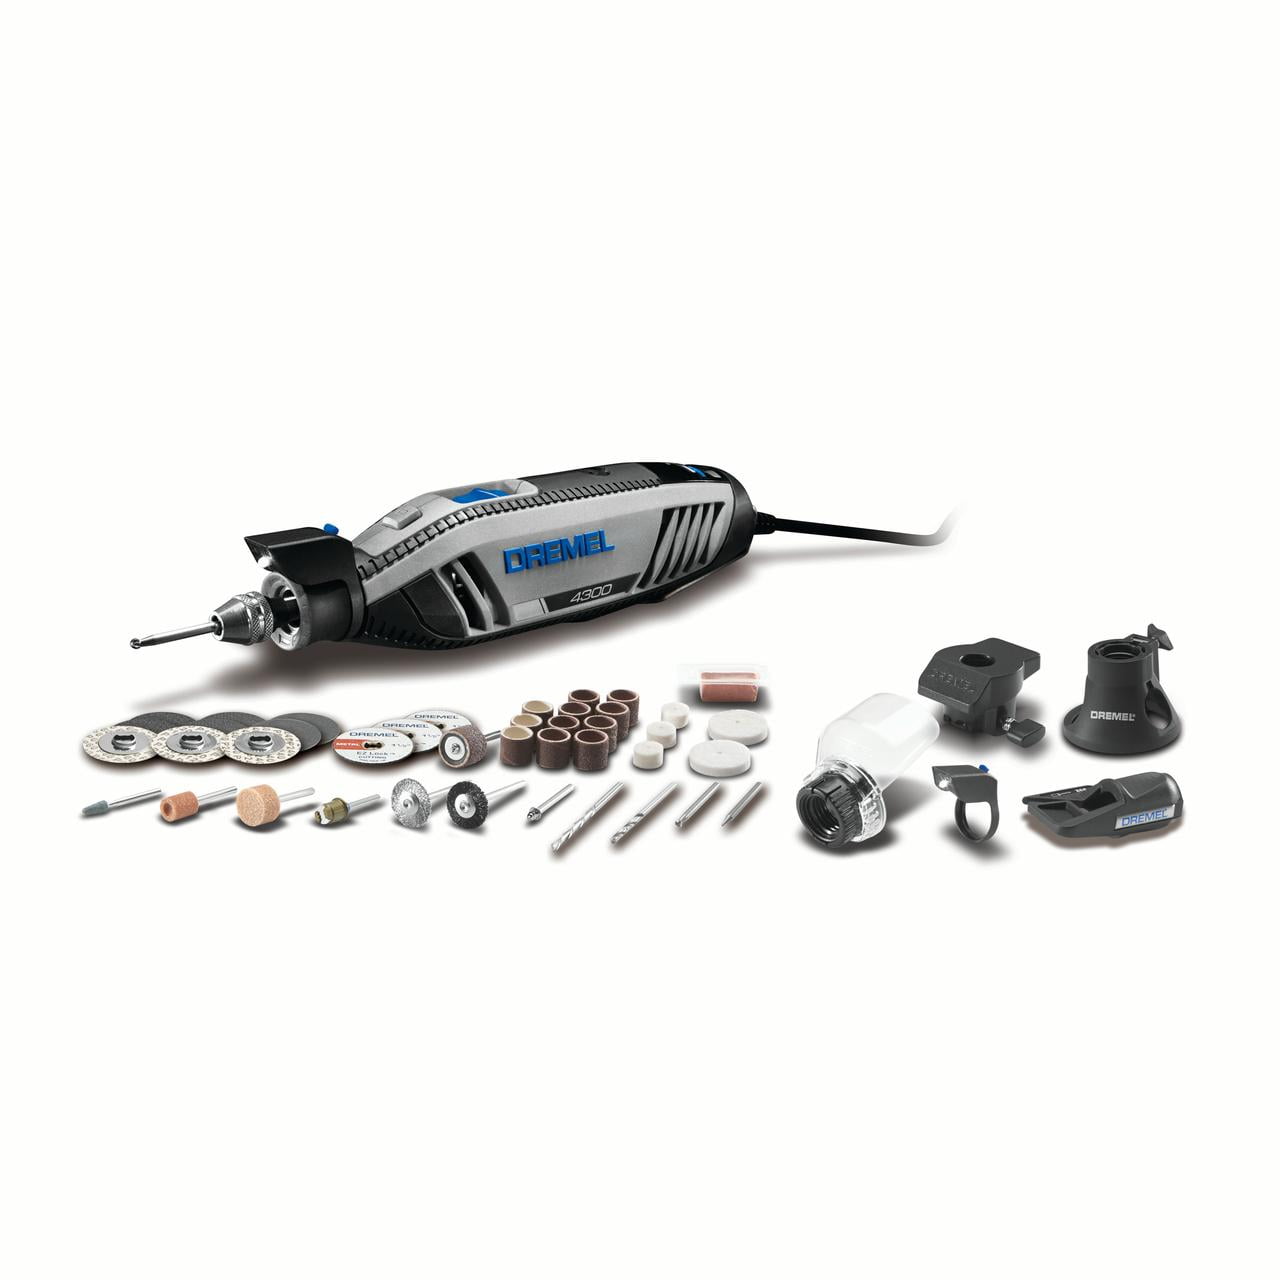 Dremel 4300-5/40 High Performance Rotary Tool Kit with LED Light- 5  Attachments & 40 Accessories & 4486 Keyless Chuck, ideal for 1/32 (0.8mm)  to 1/8 (3.2mm) Shank Rotary Tool Accessories 